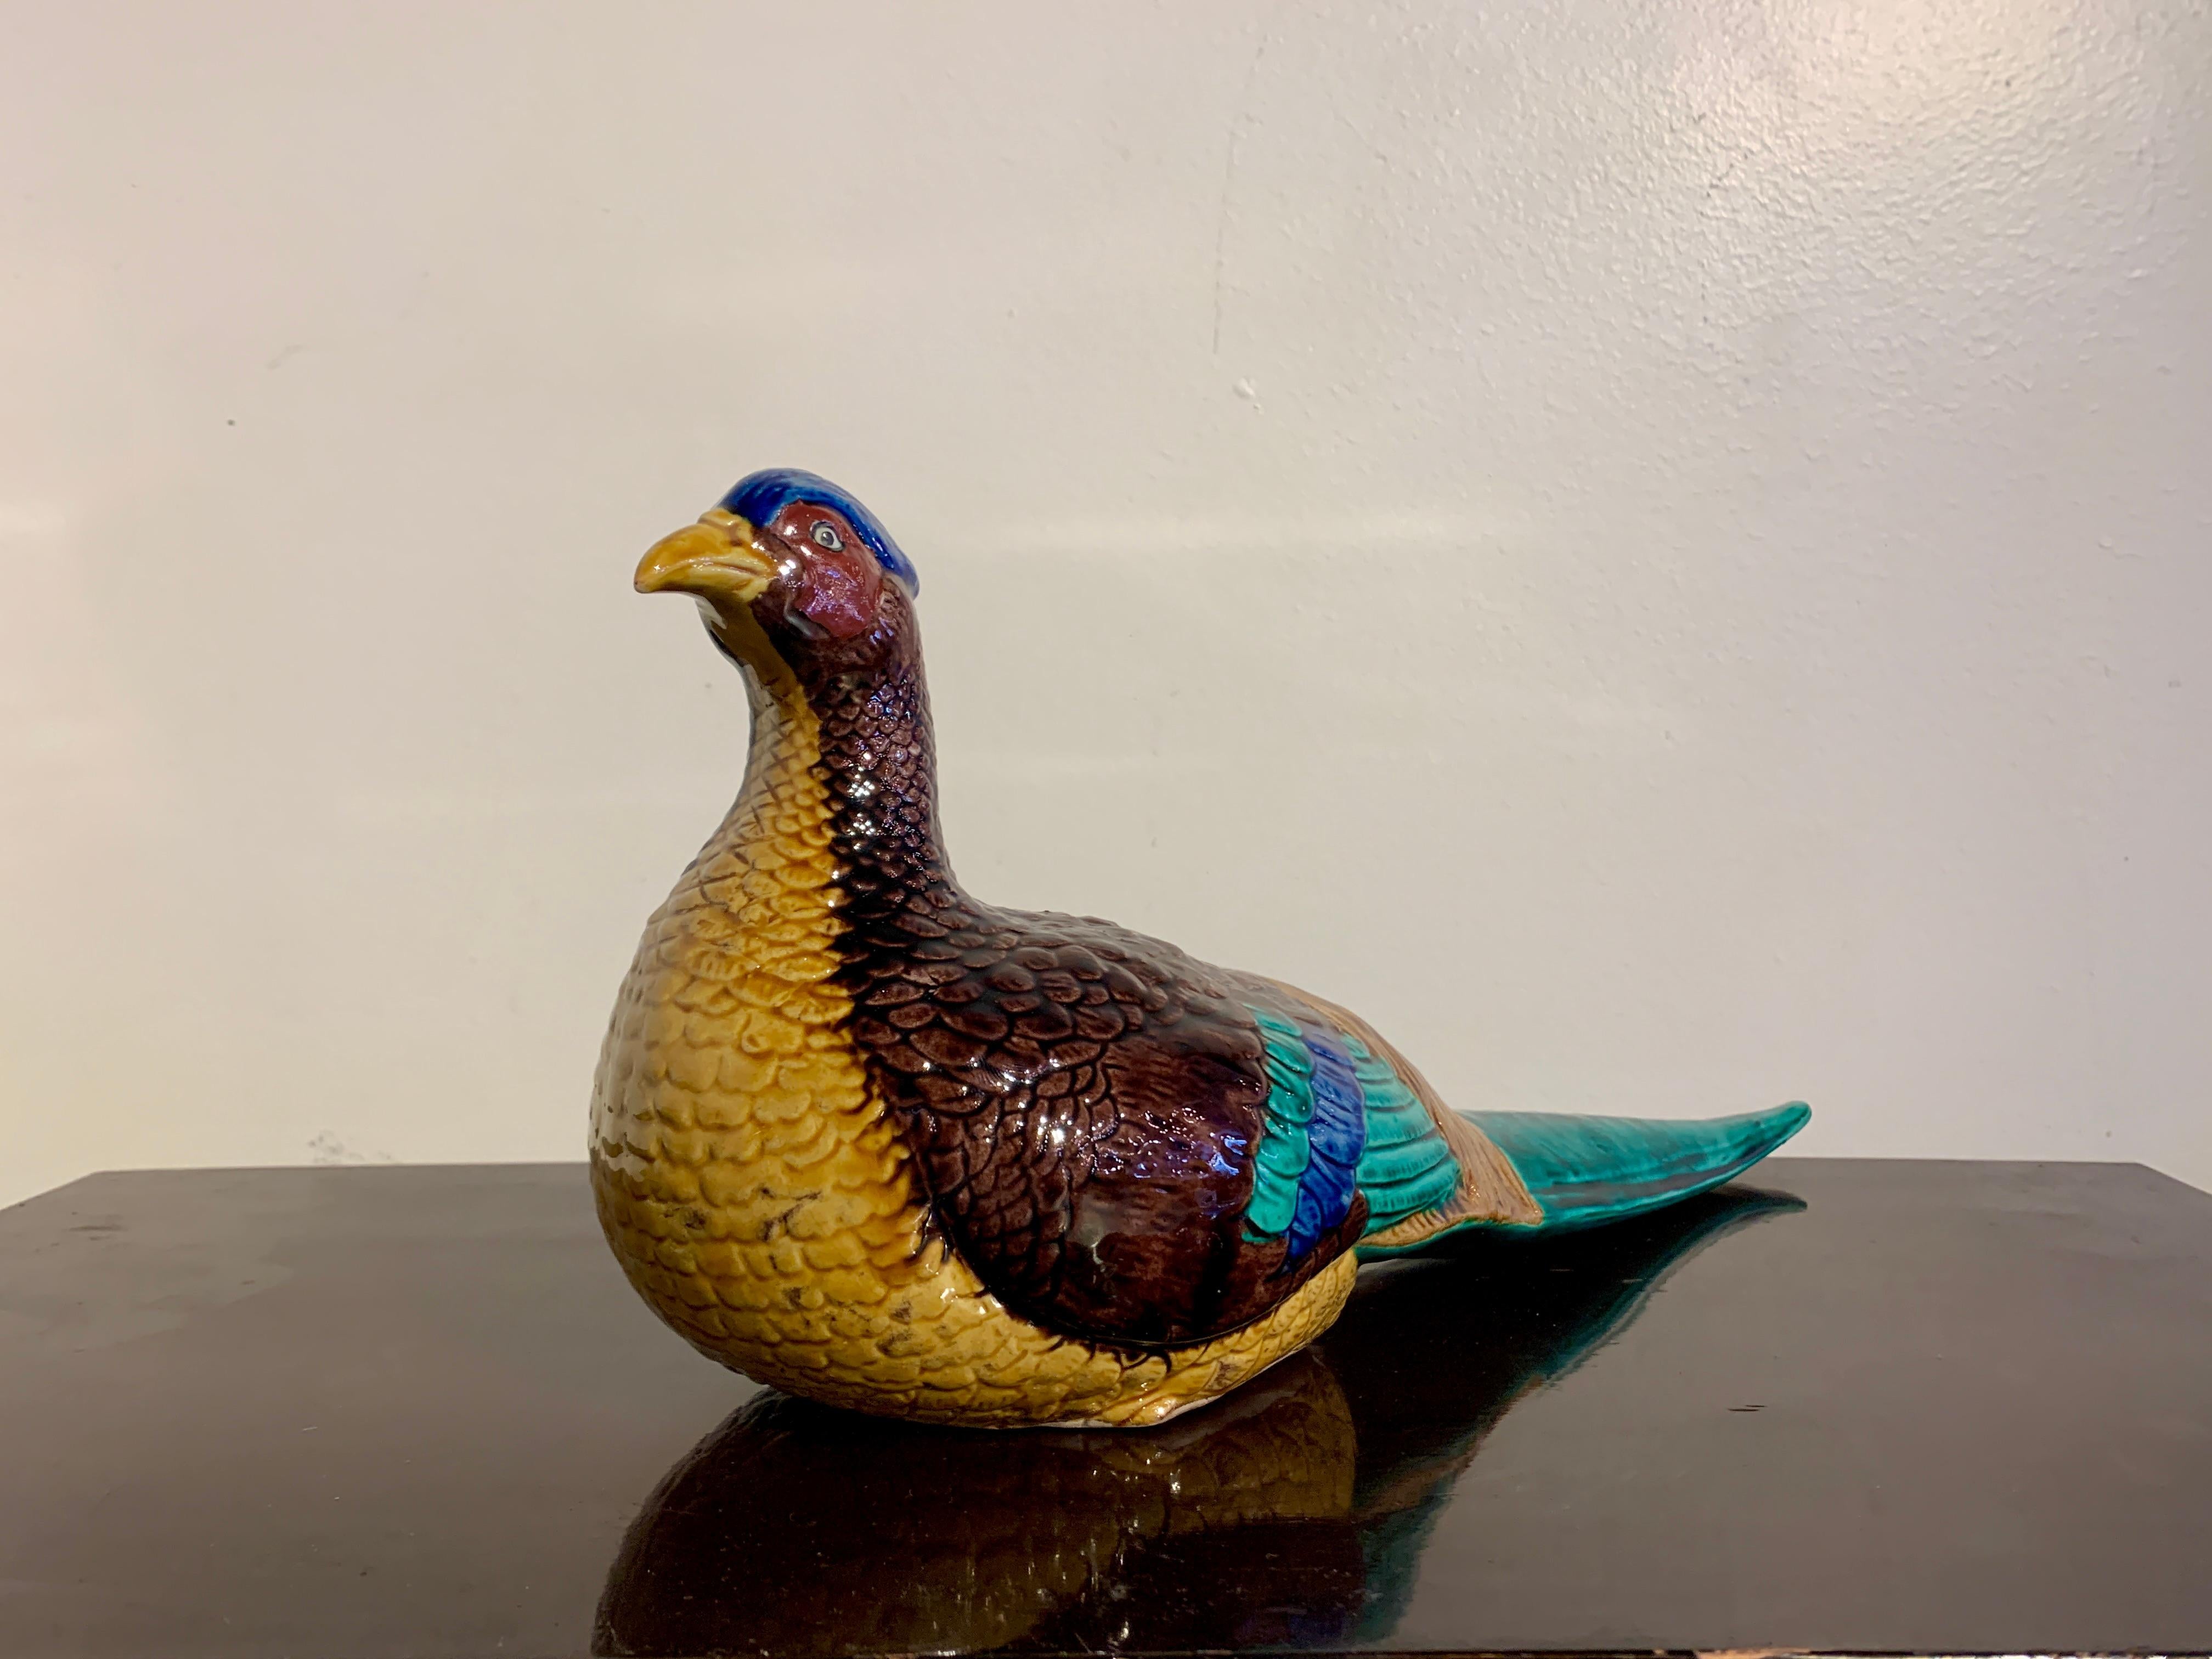 A spectacularly glazed Japanese Kutani model, okimono, of a pheasant, Showa era, early 20th century, Japan.

The okimono, or decorative sculpture, in the form of a magnificent pheasant portrayed in a recumbent position, head up and alert, wings